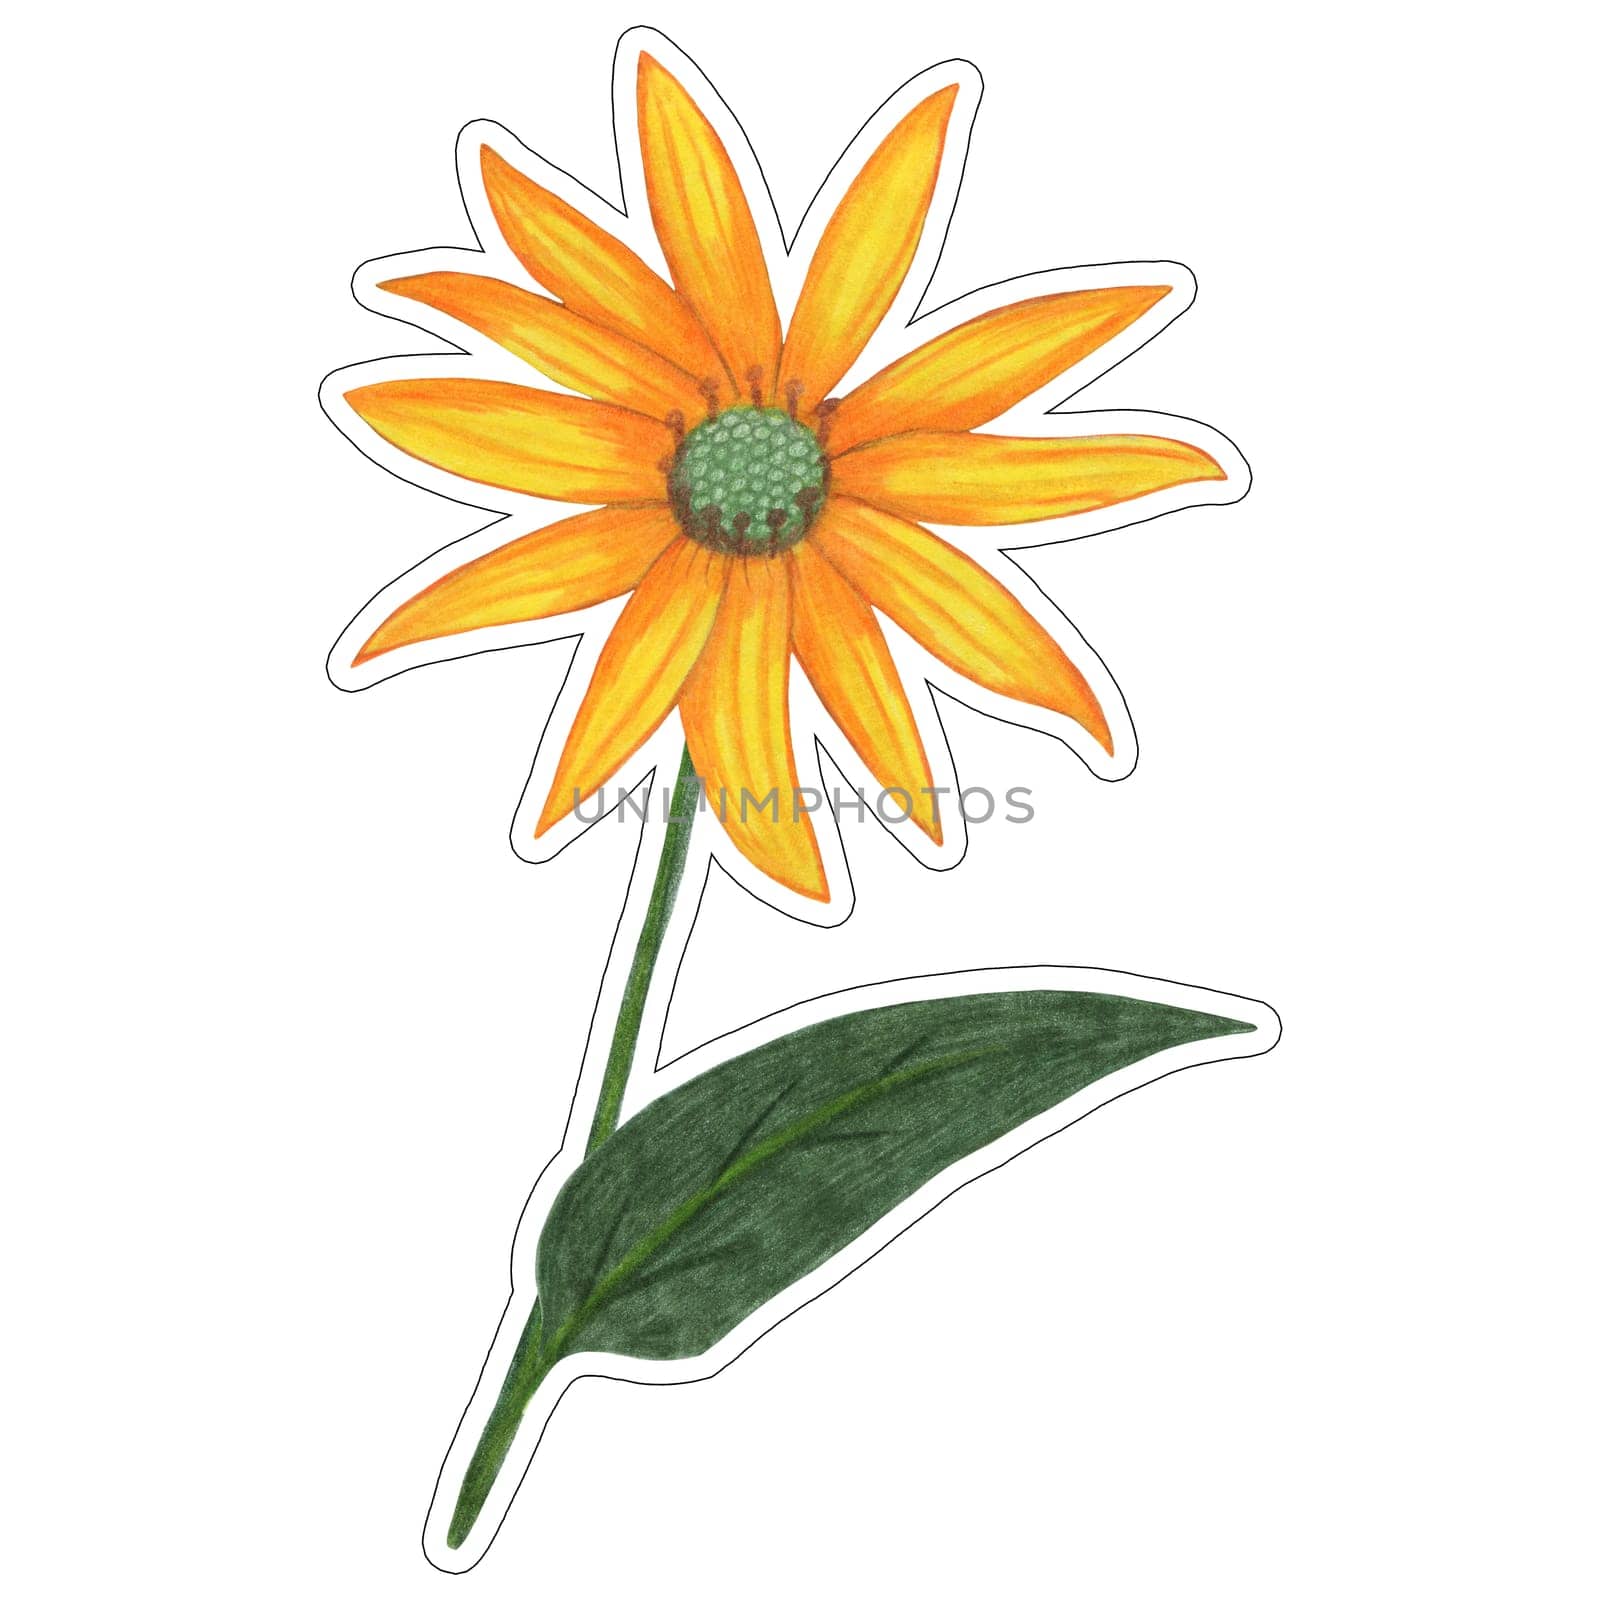 Sticker of Yellow Topinambur with Green Leaves Isolated on White Background. Jerusalem Artichoke Flower Element Sticker Drawn by Colored Pencil.